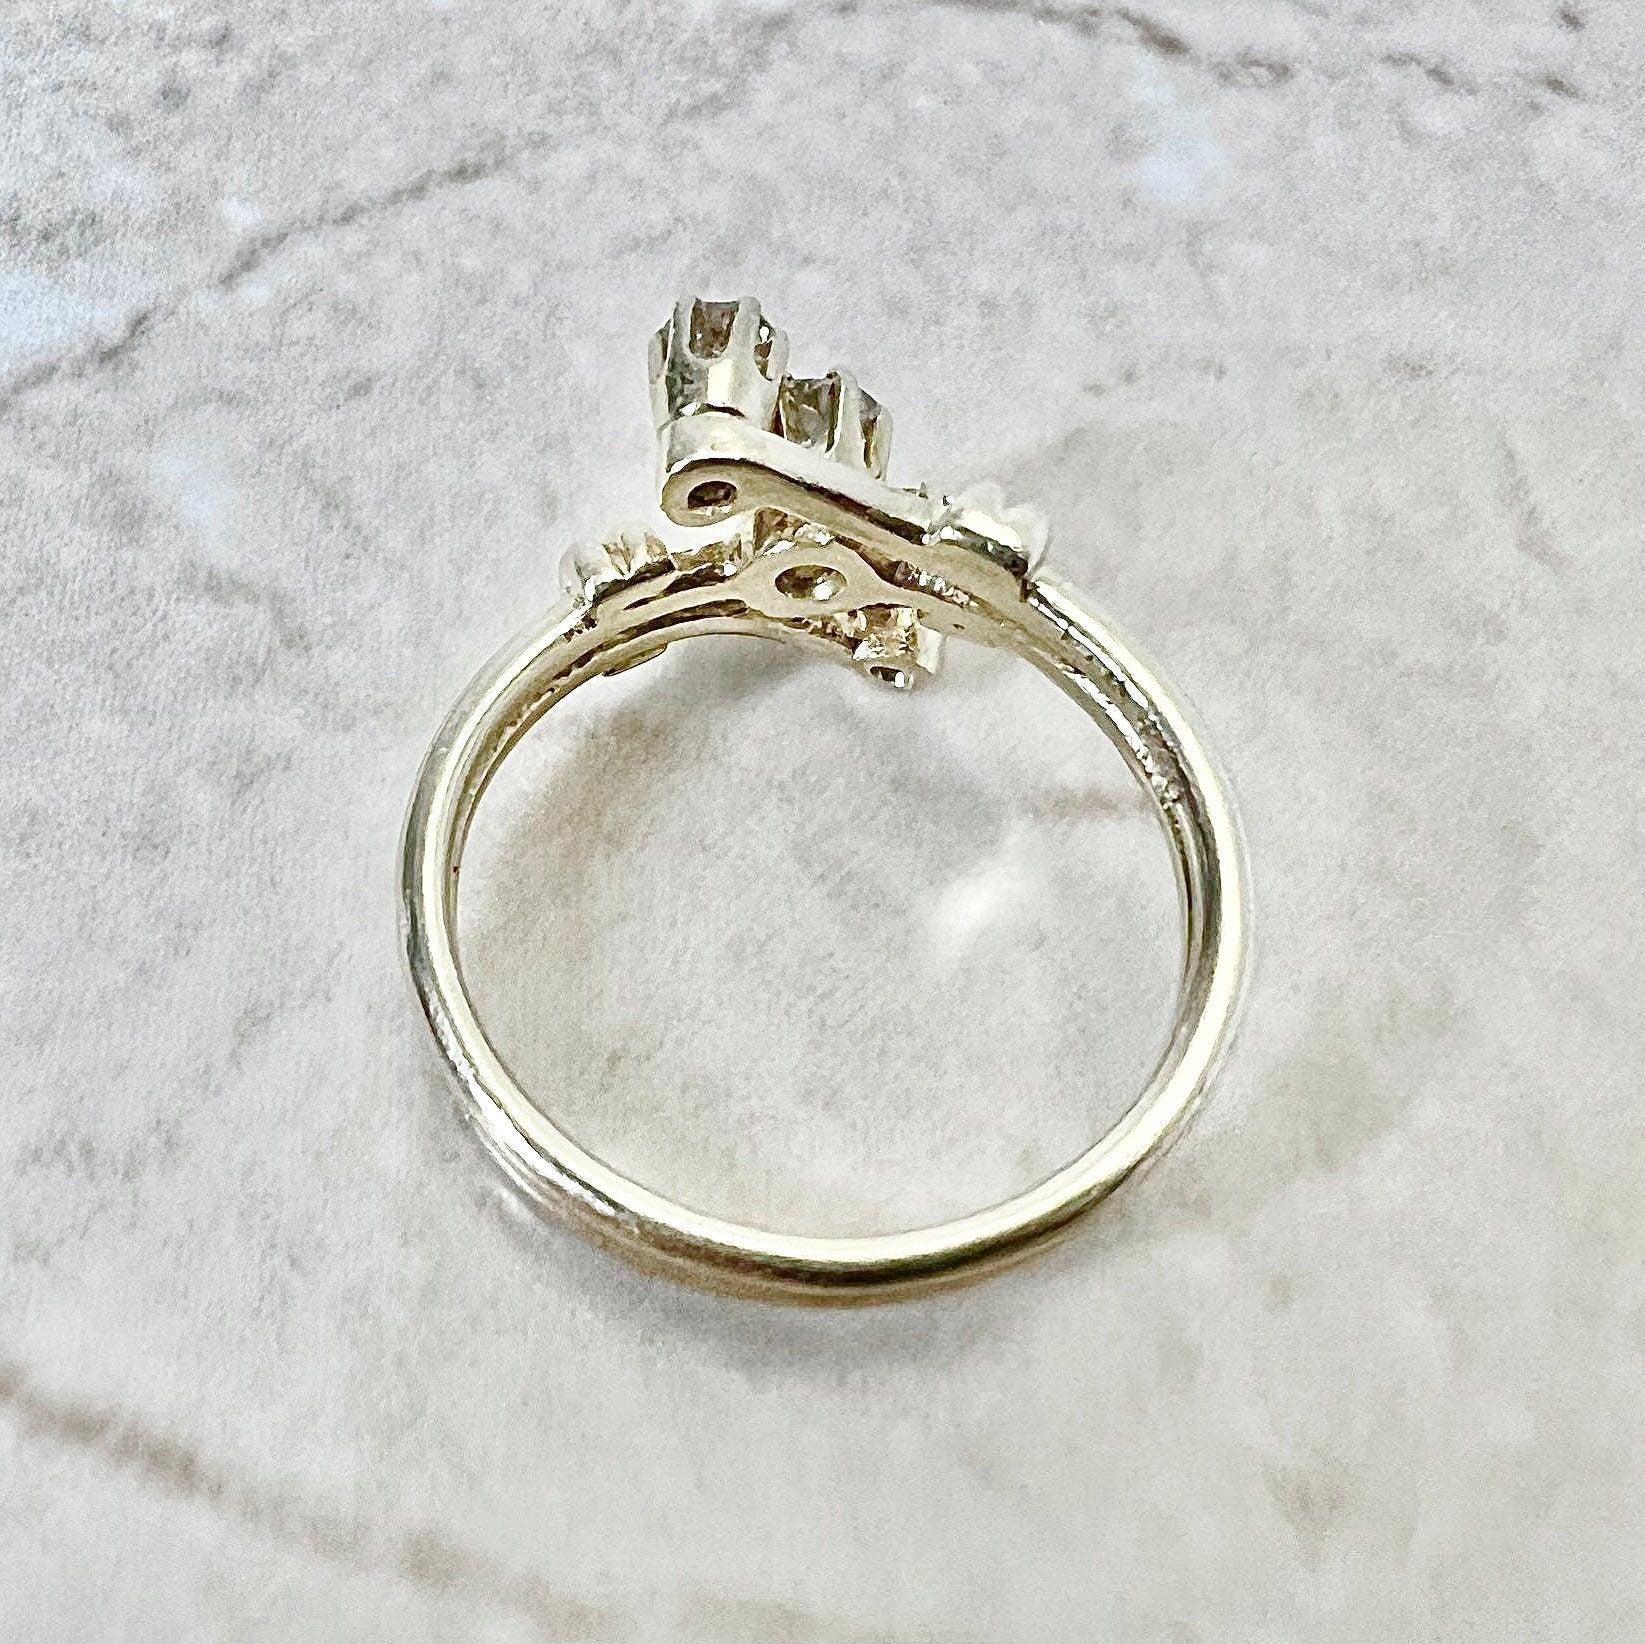 Vintage 14K 3 Stone Diamond Ring - Yellow Gold Diamond Cocktail Ring - Anniversary Ring - Promise Ring - Statement Ring - Best Gift For Her